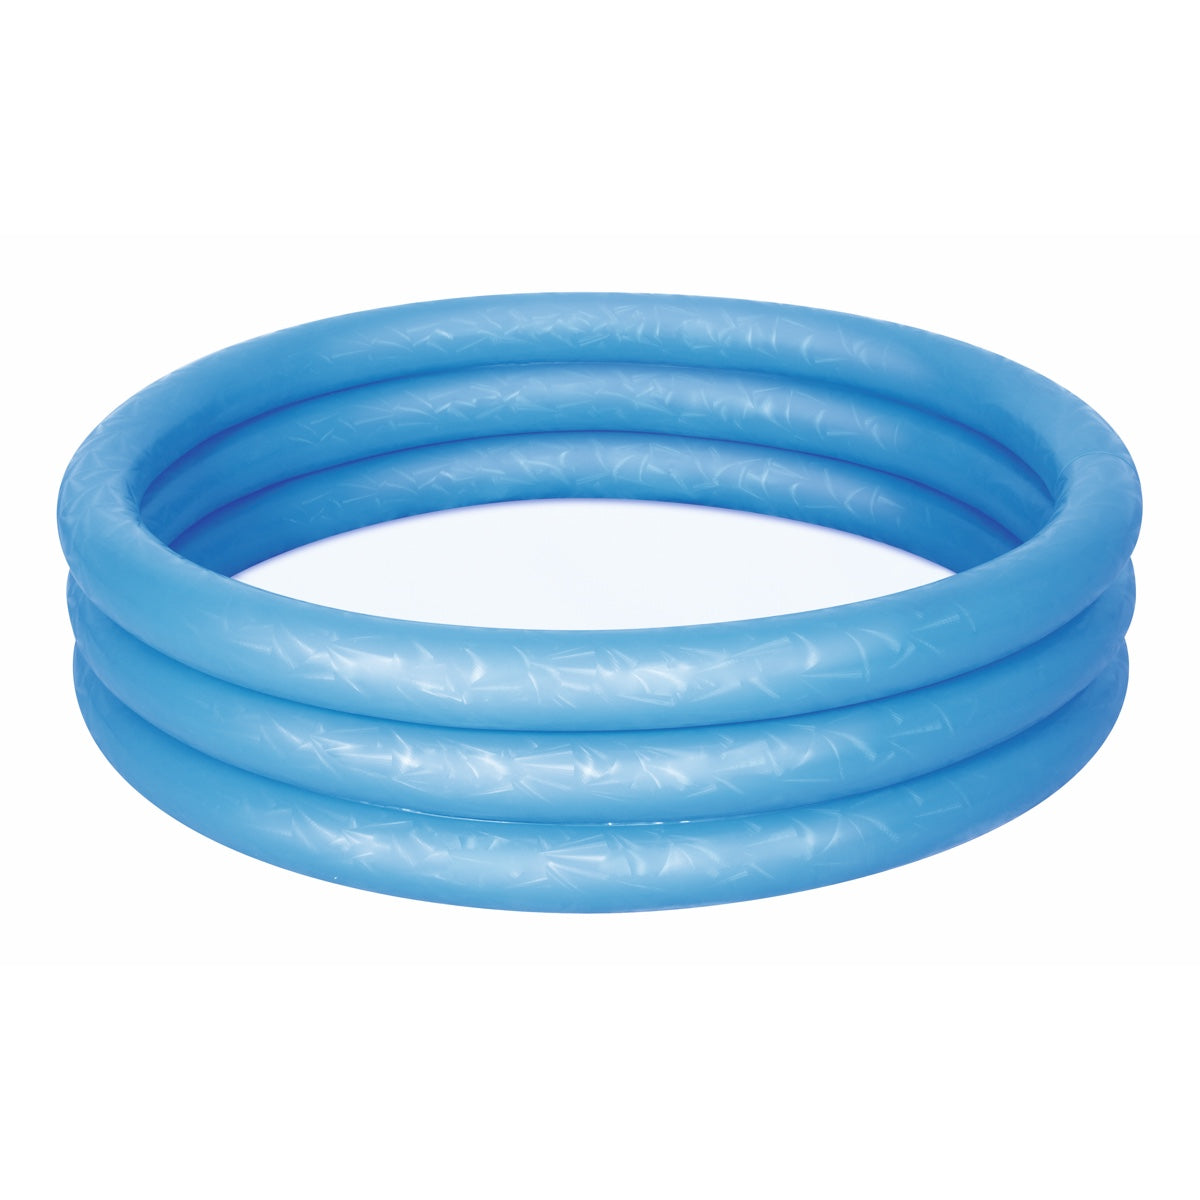 Piscina Inflable Bestway 3 Anillos Colores 1.02m x 25cm